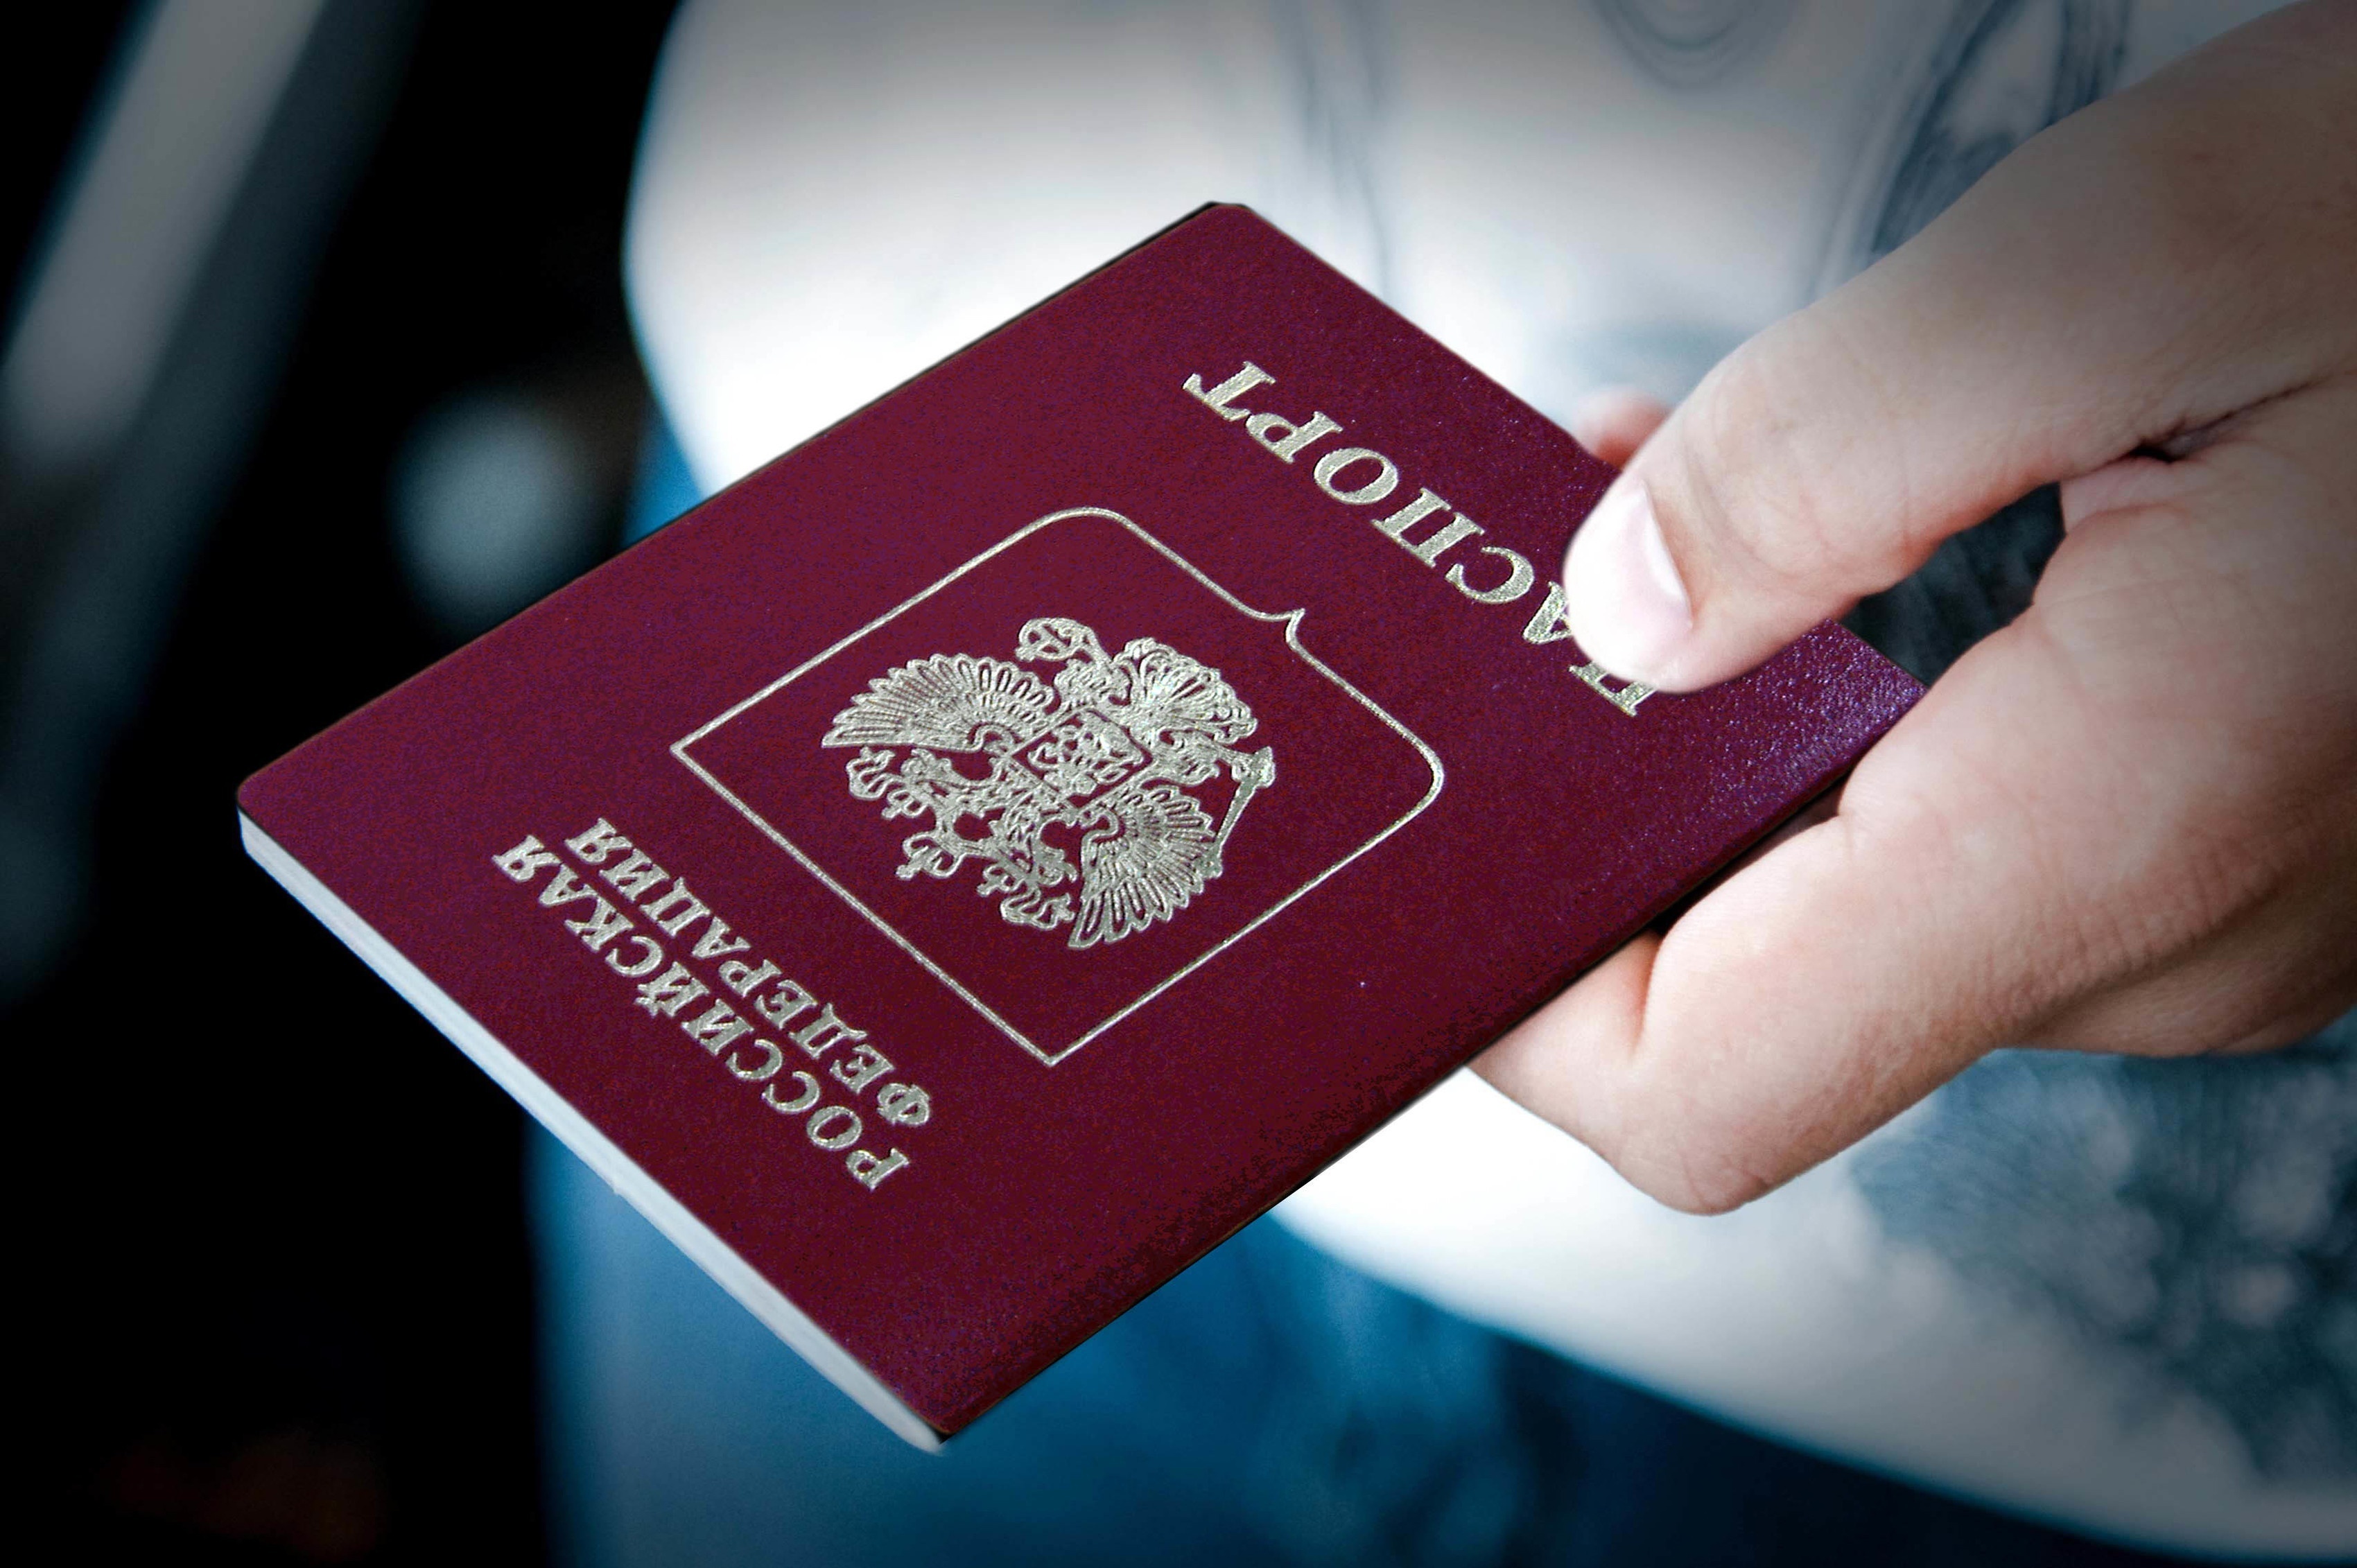 Russian citizens will be able to reject the digital passport